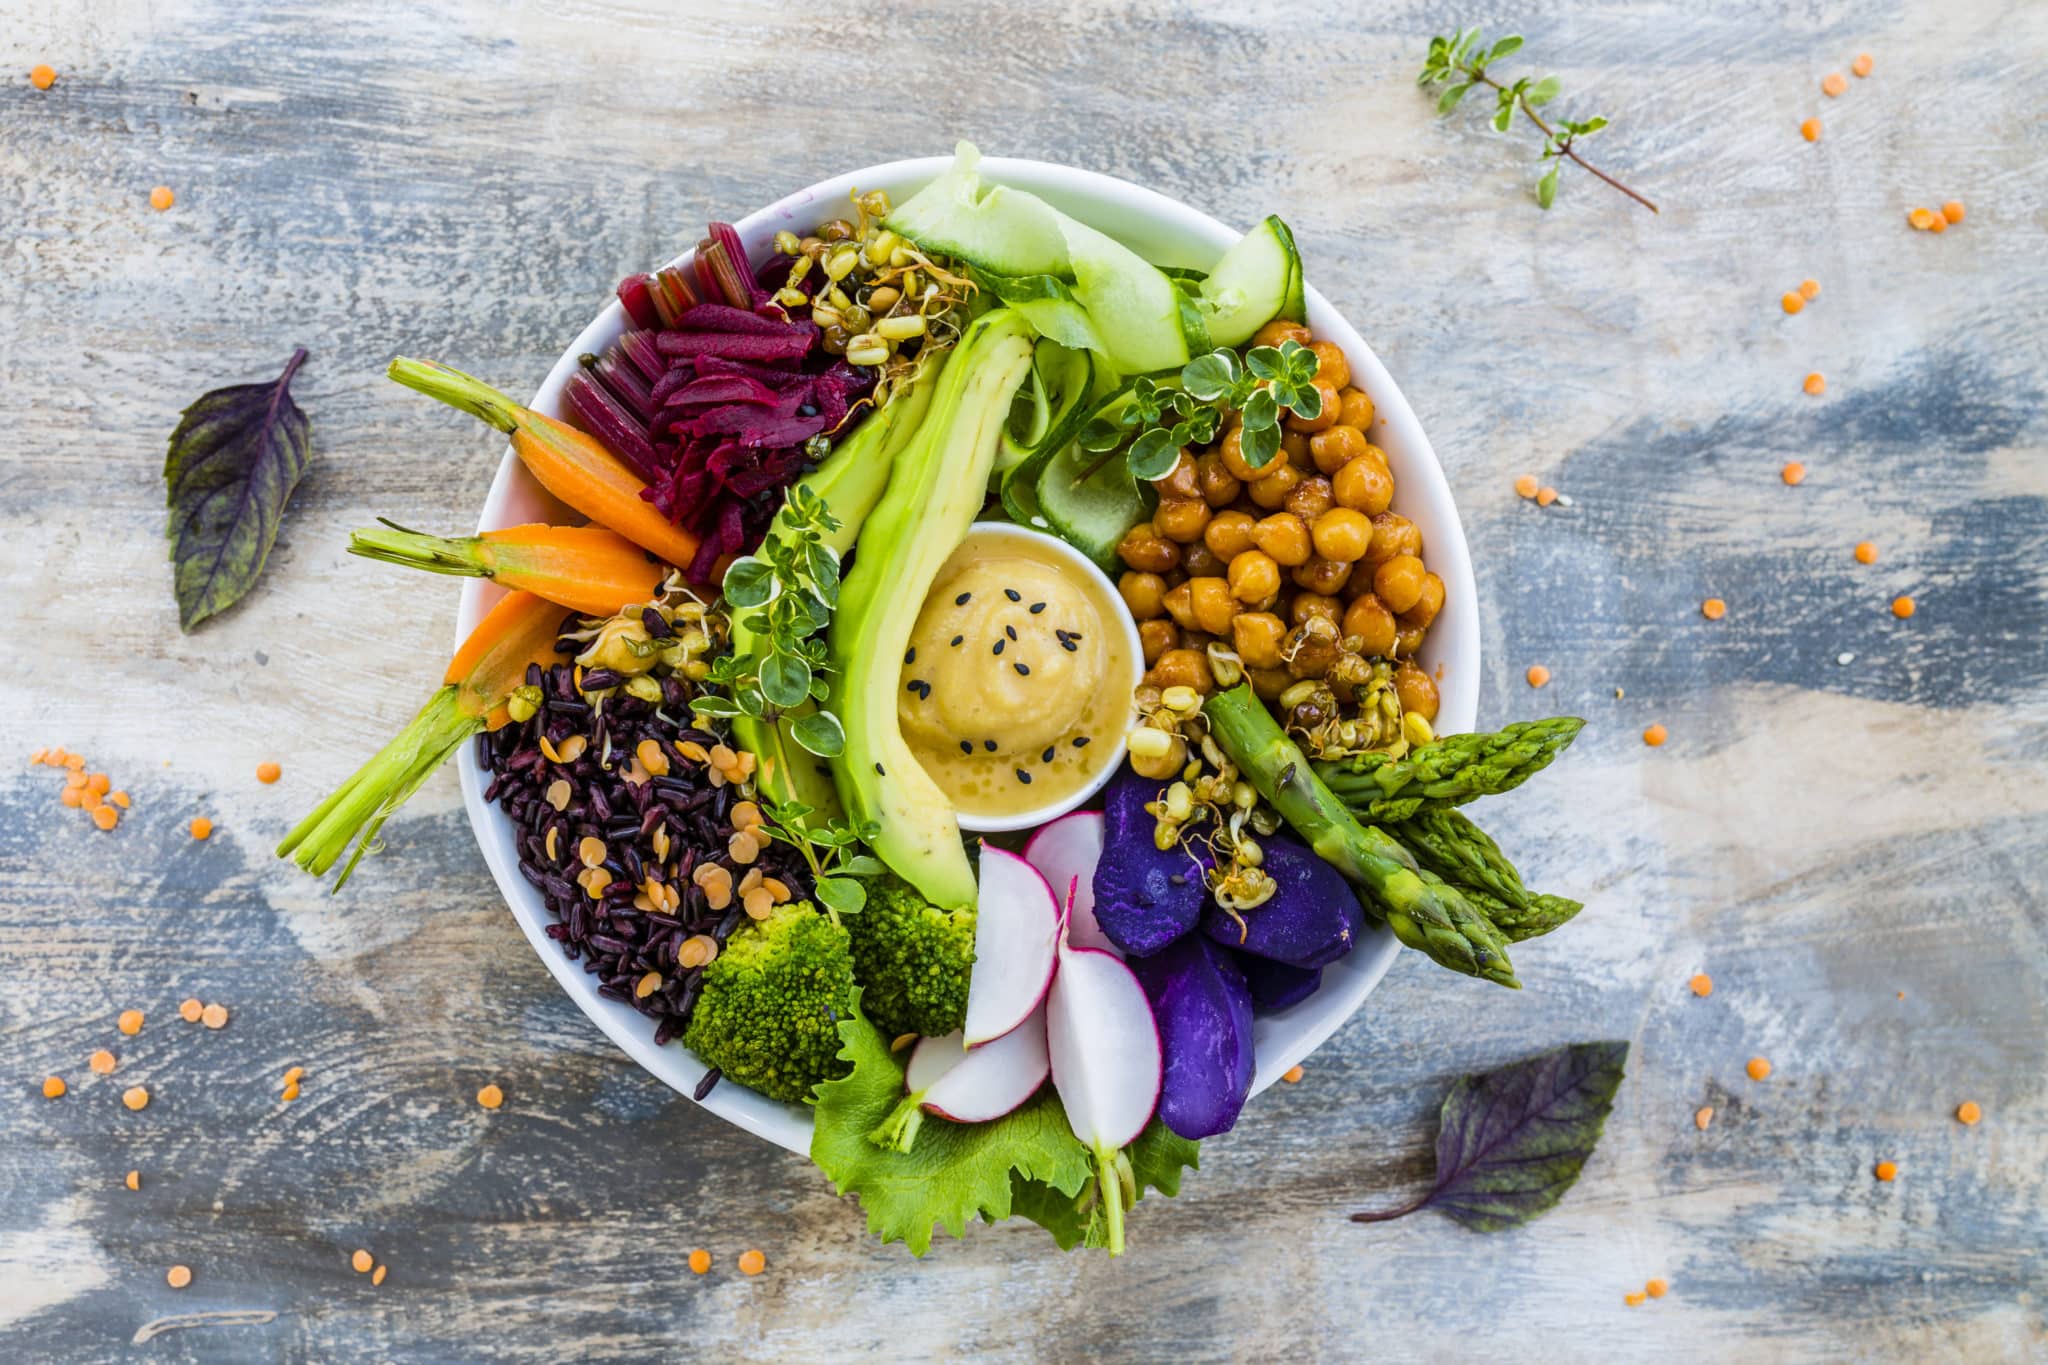 Vegetarian buddha bowl on wood table with carrots, black rice, lentils, hummus, avocado and more